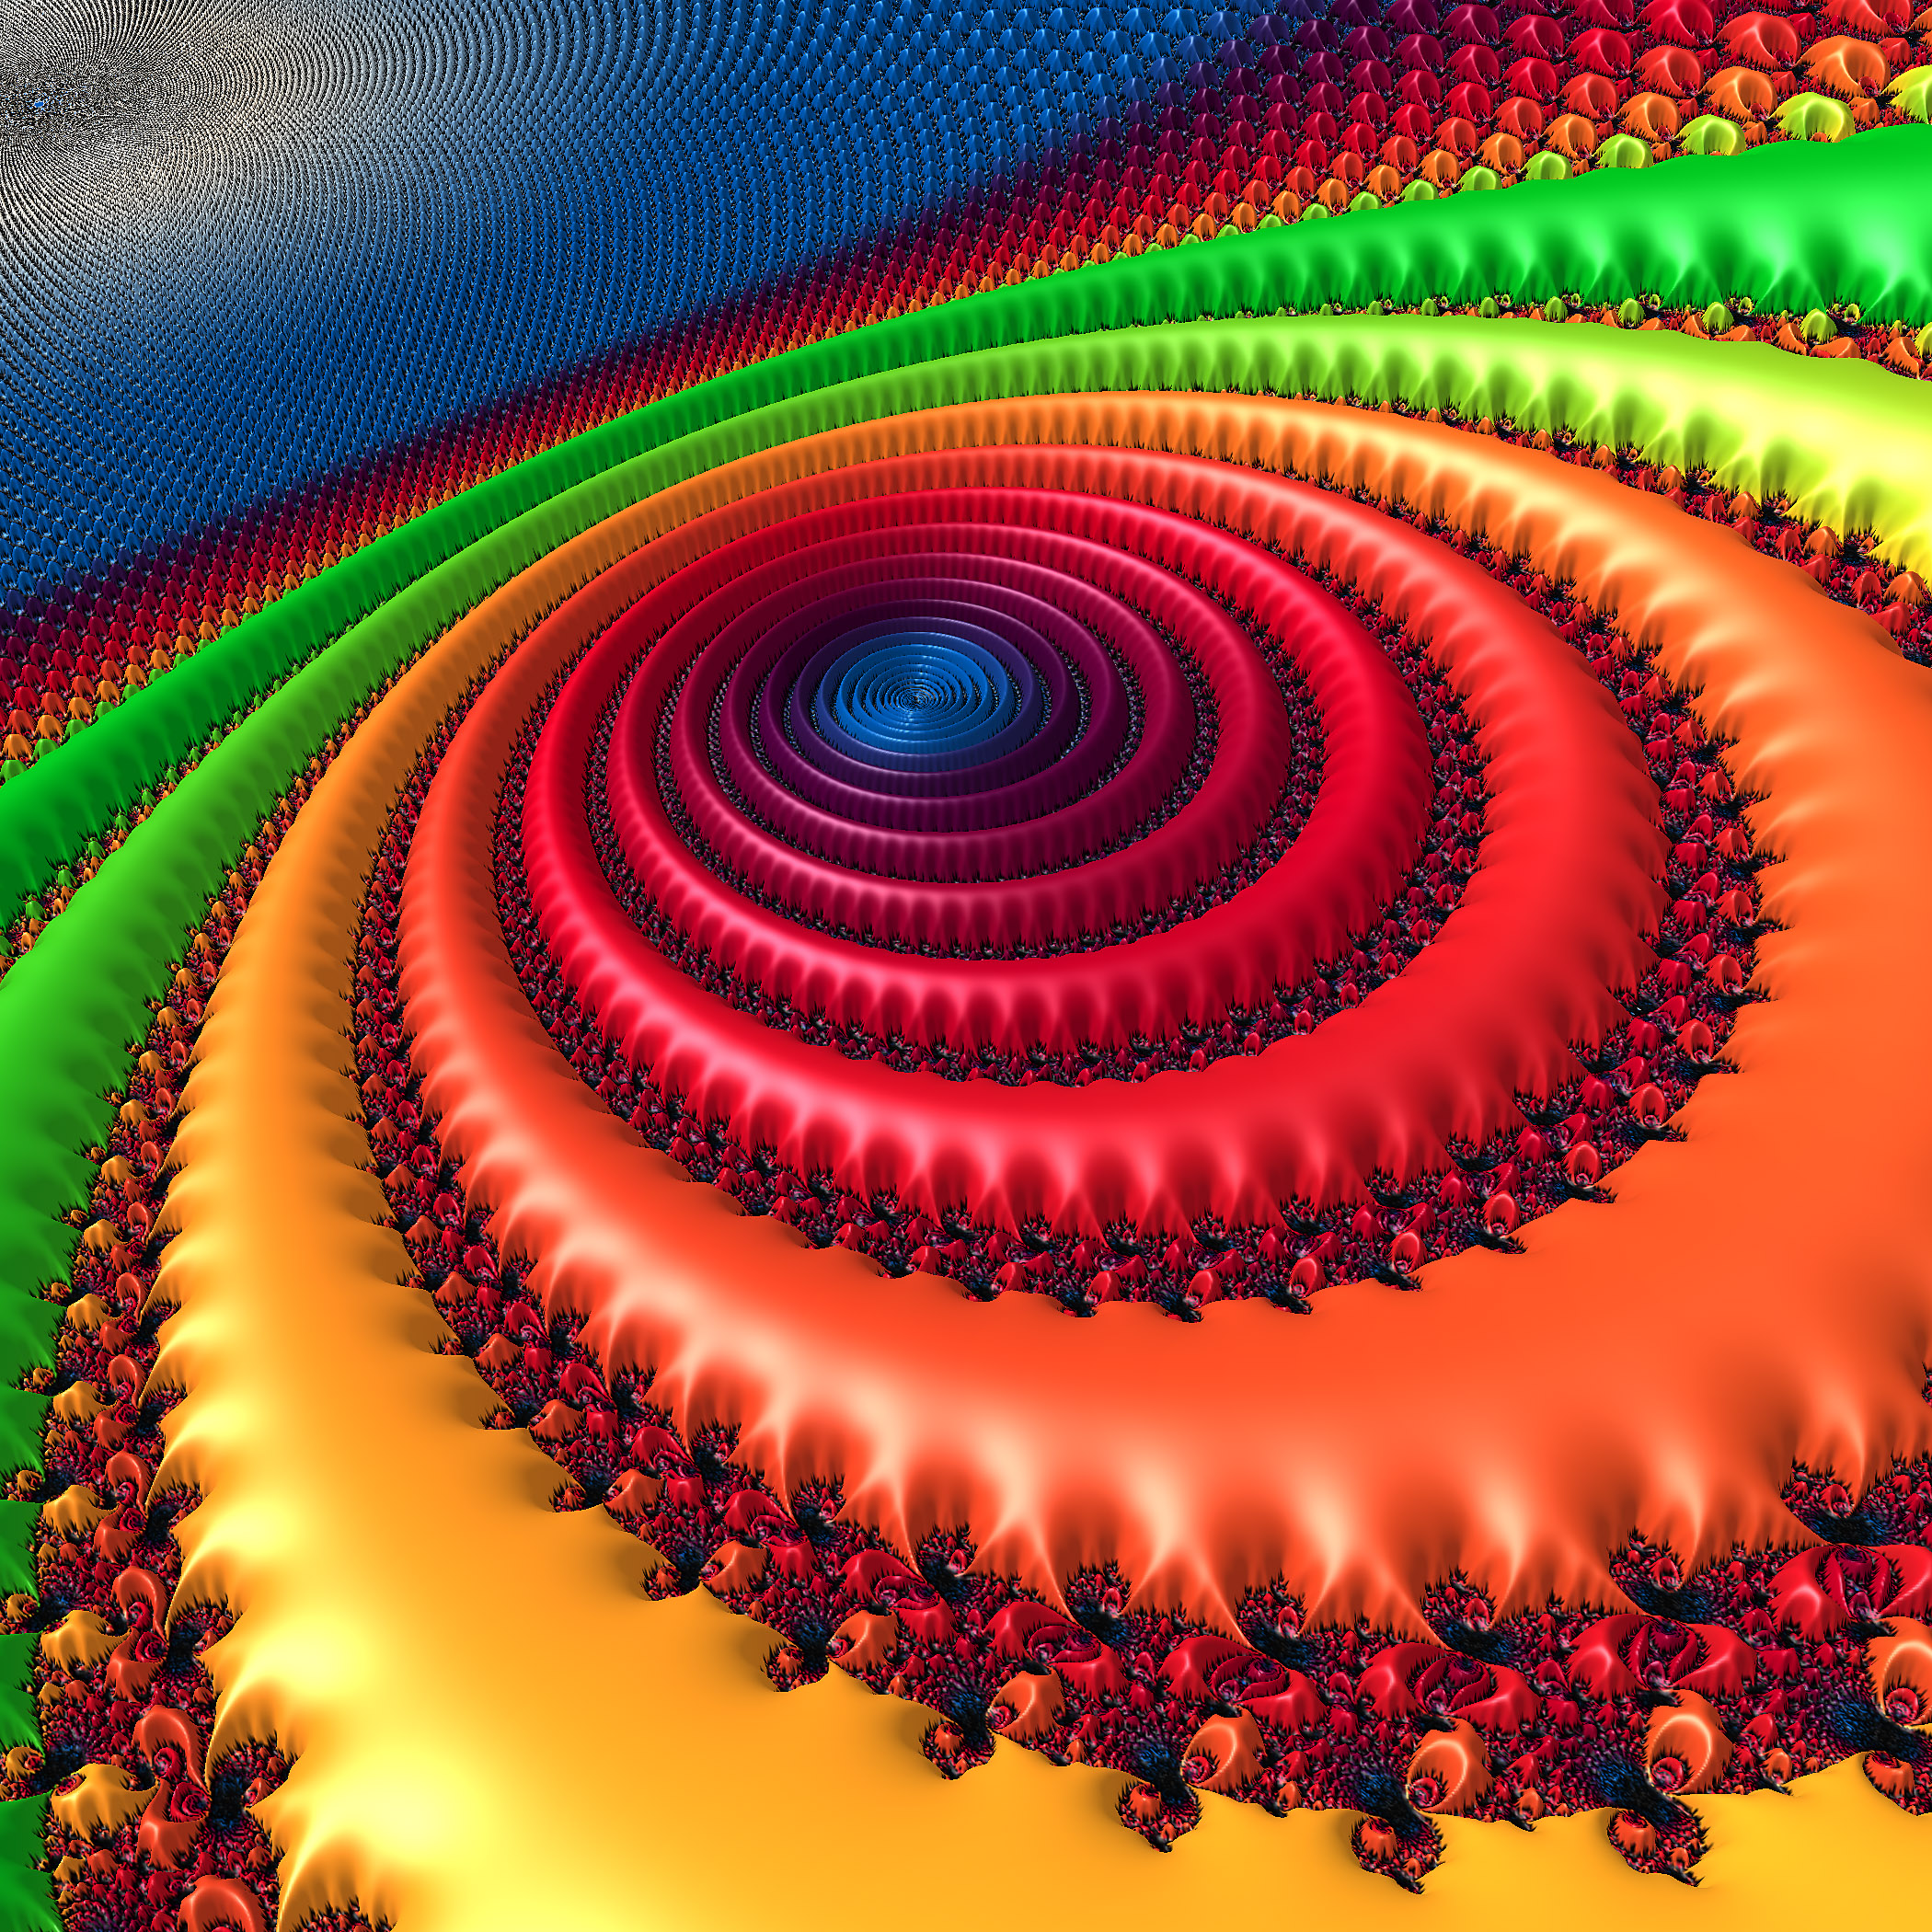 3d, rotation, spiral, multicolored HD Wallpaper for Phone